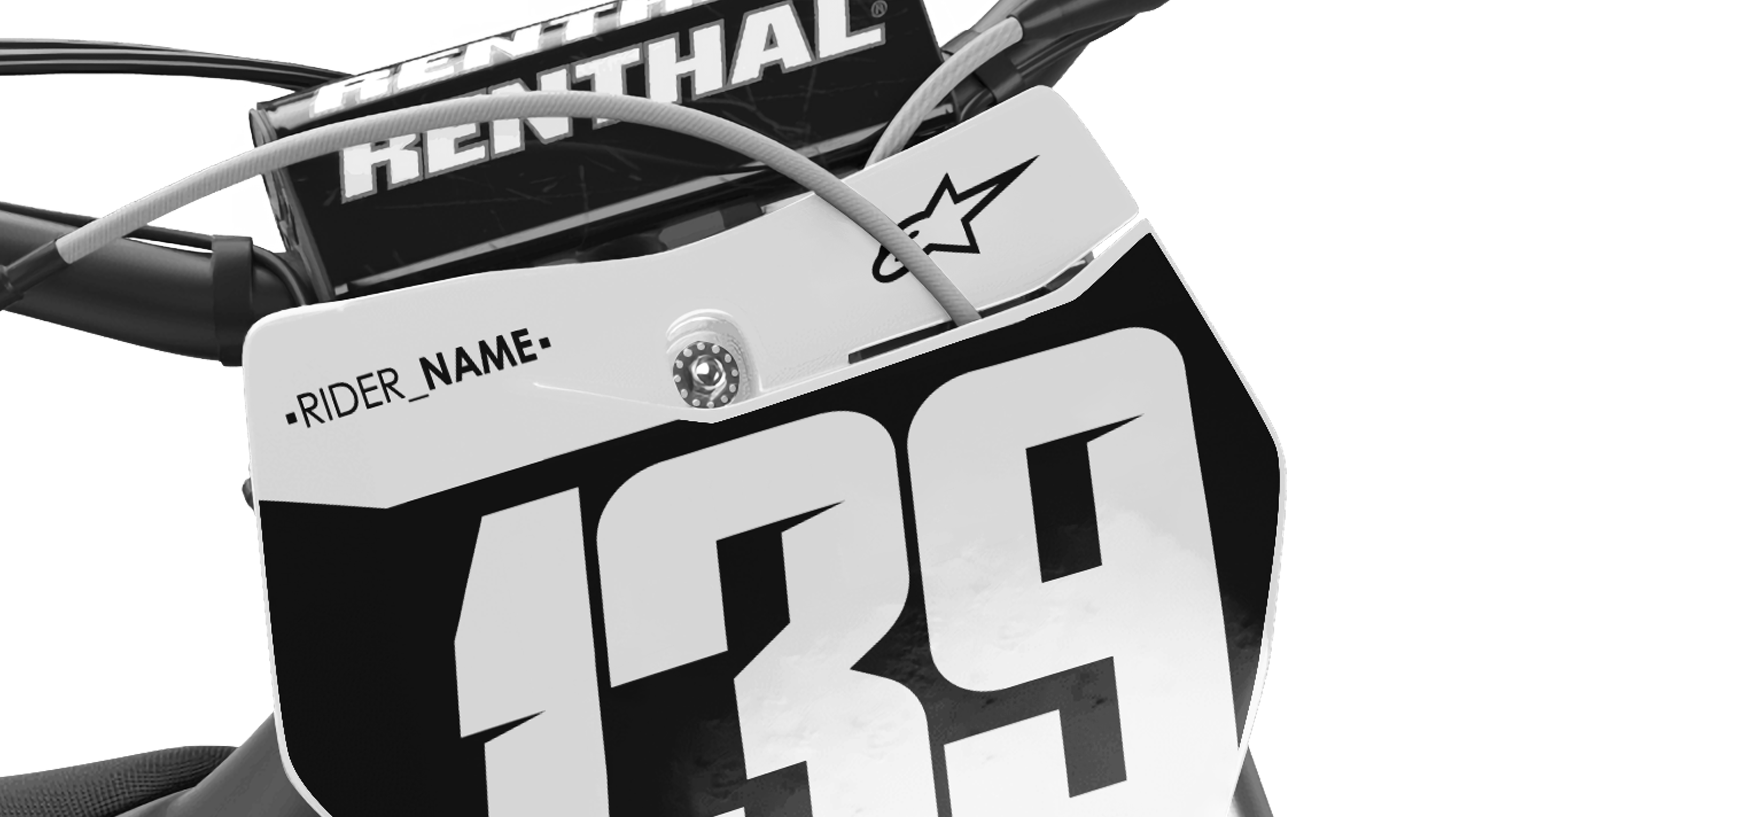 Riders Name decal example